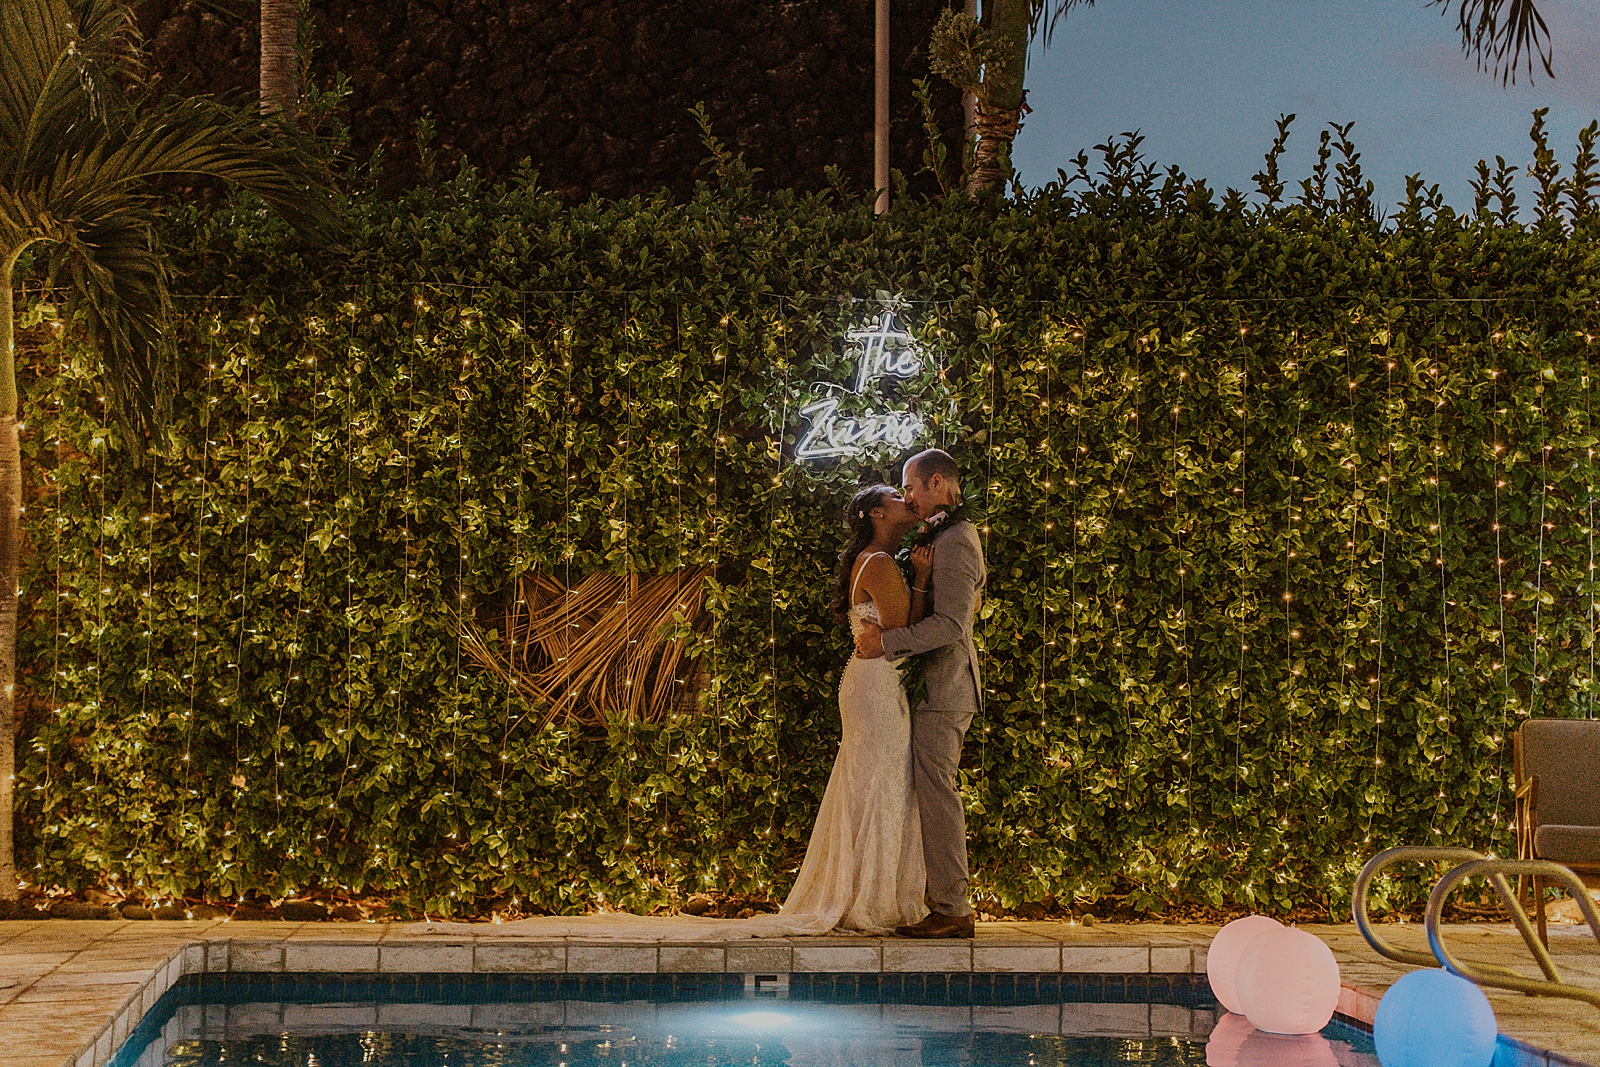 Bride and Groom kissing by the pool in front of light up sign of their last name